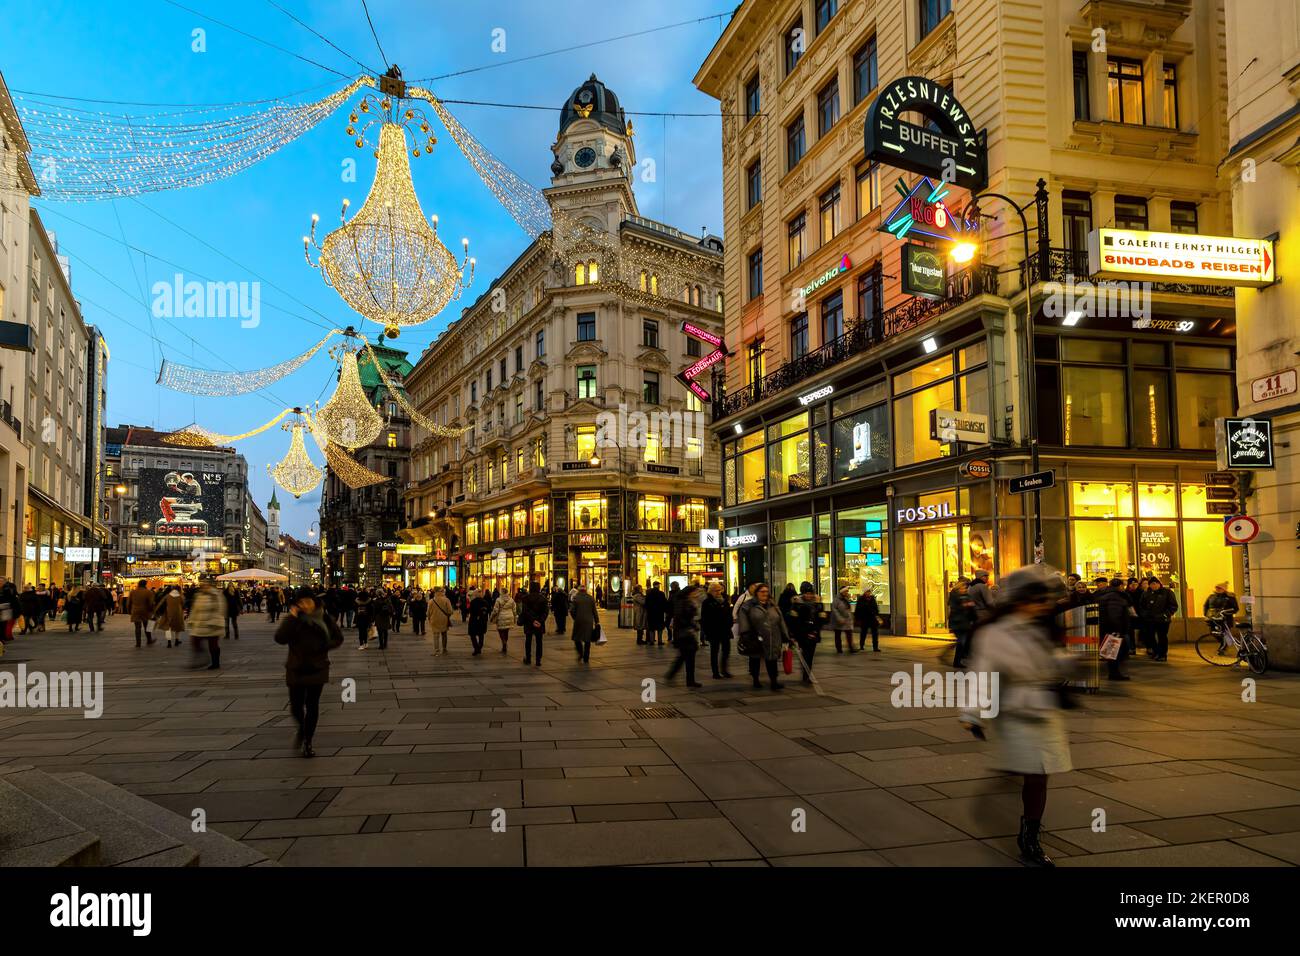 People walking on evening Graben street - one of the main and famous pedestrian streets in Vienna, Austria. Stock Photo